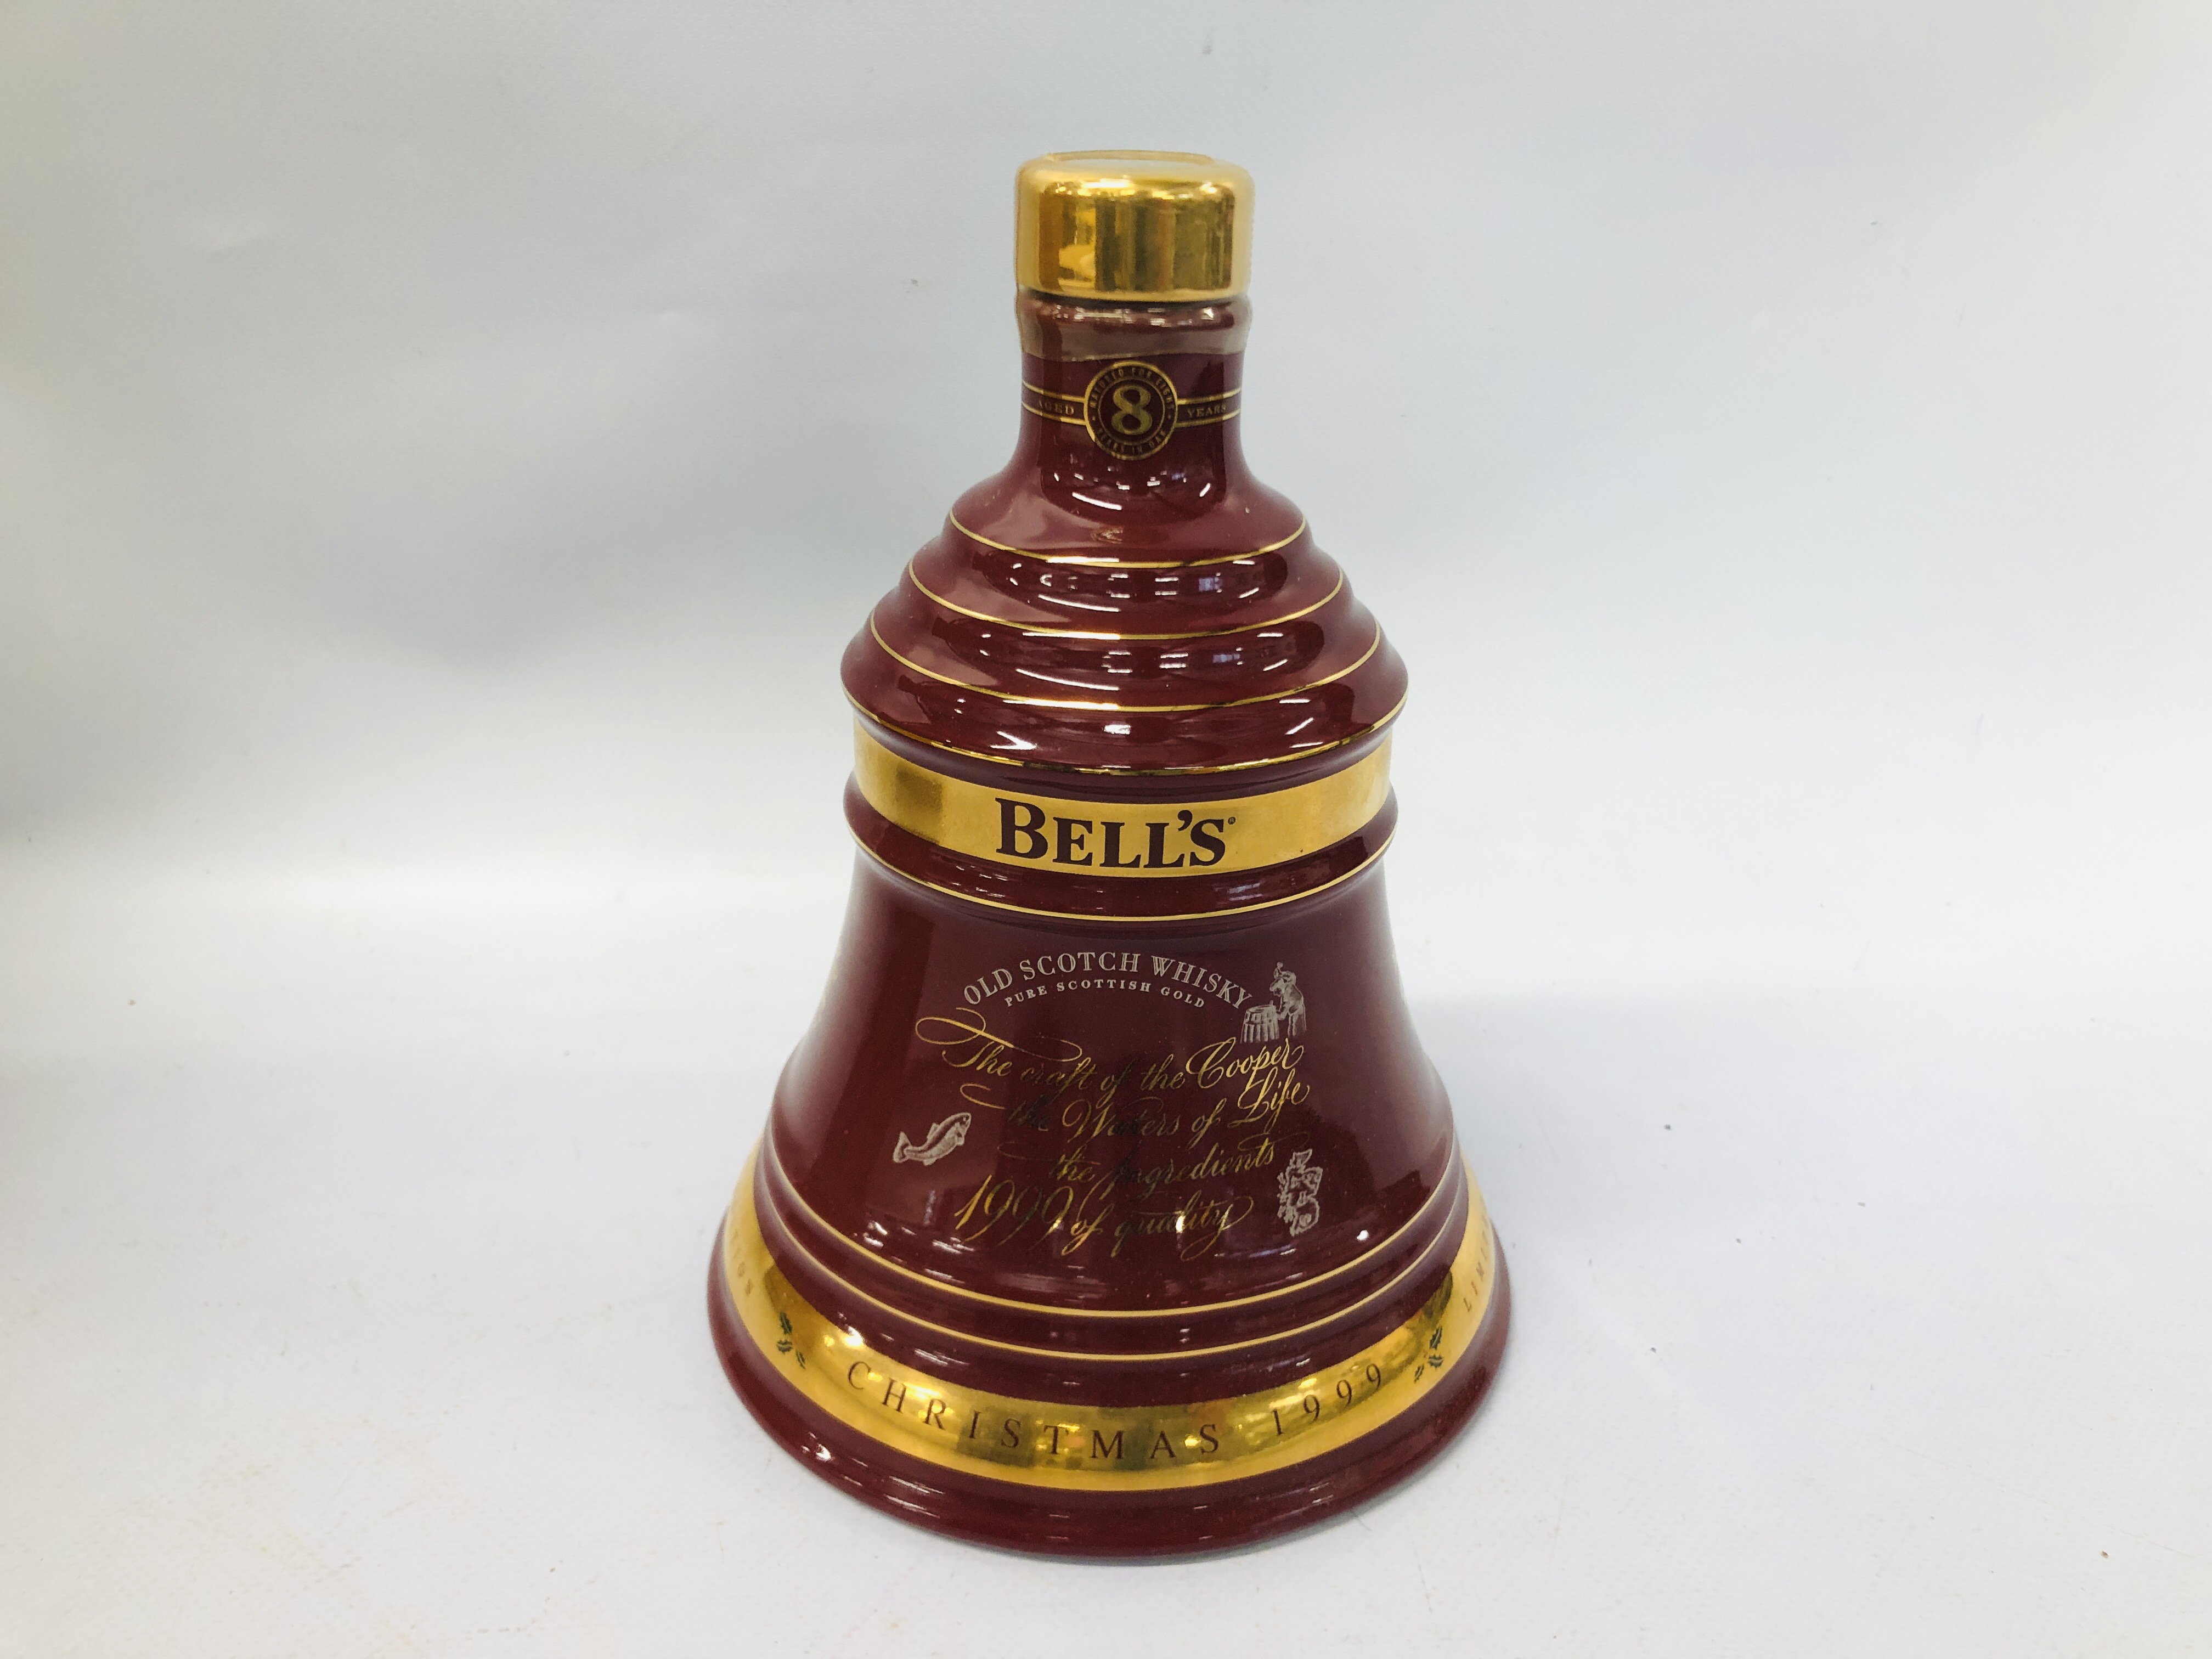 BELLS OLD SCOTCH WHISKY L EDITION CHRISTMAS 1999 DECANTER 70CL (BOXED) - Image 2 of 4